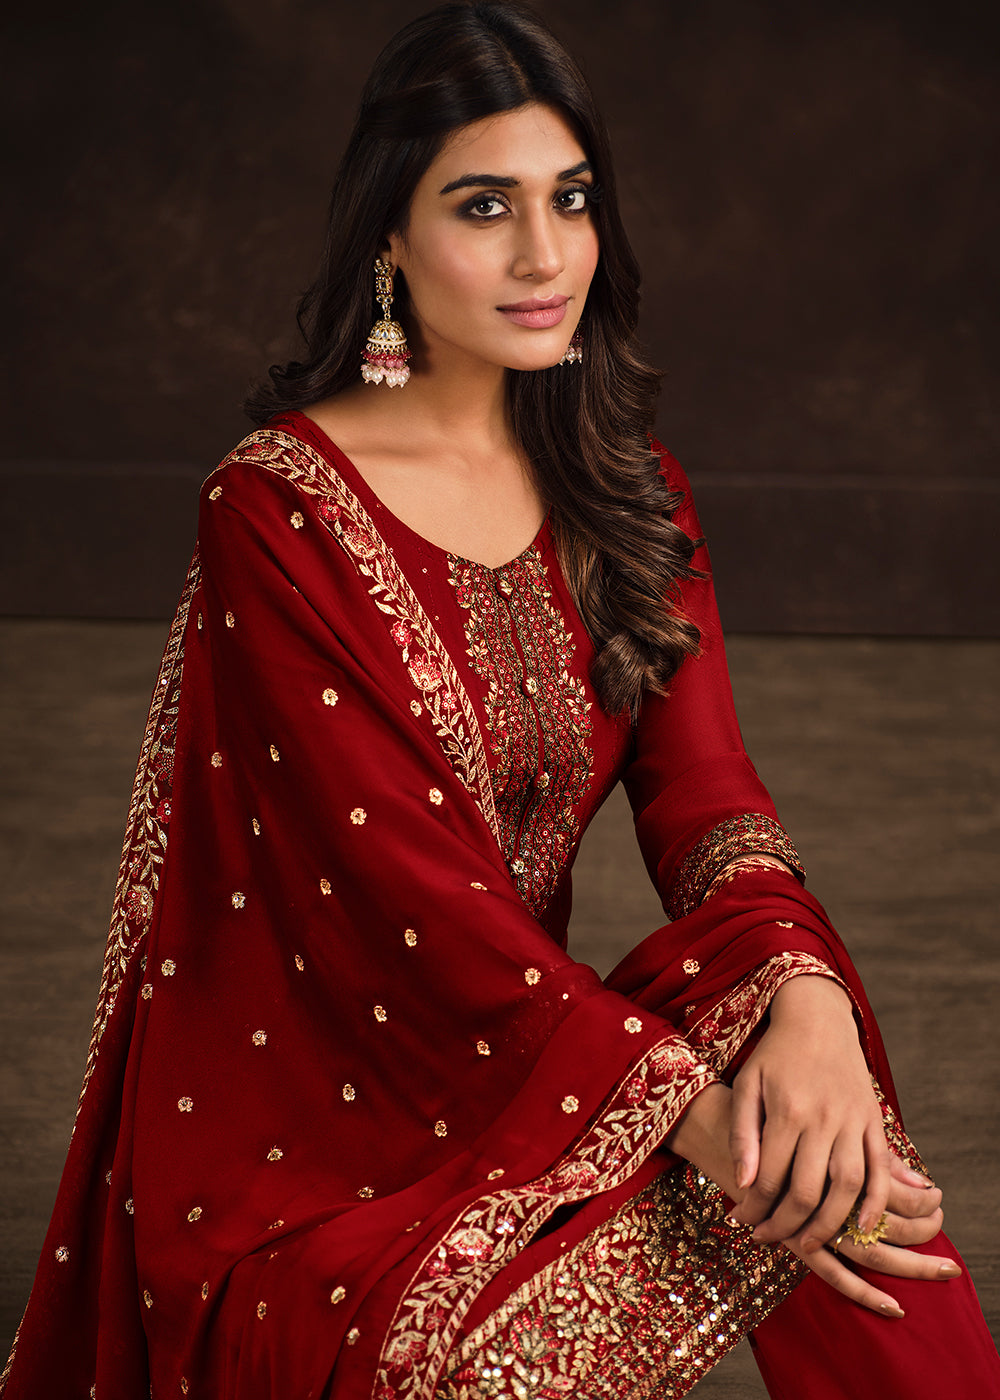 Buy Now Fancy Georgette Stunning Red Pakistani Style Salwar Suit Online in USA, UK, Canada, Germany, Australia & Worldwide at Empress Clothing.